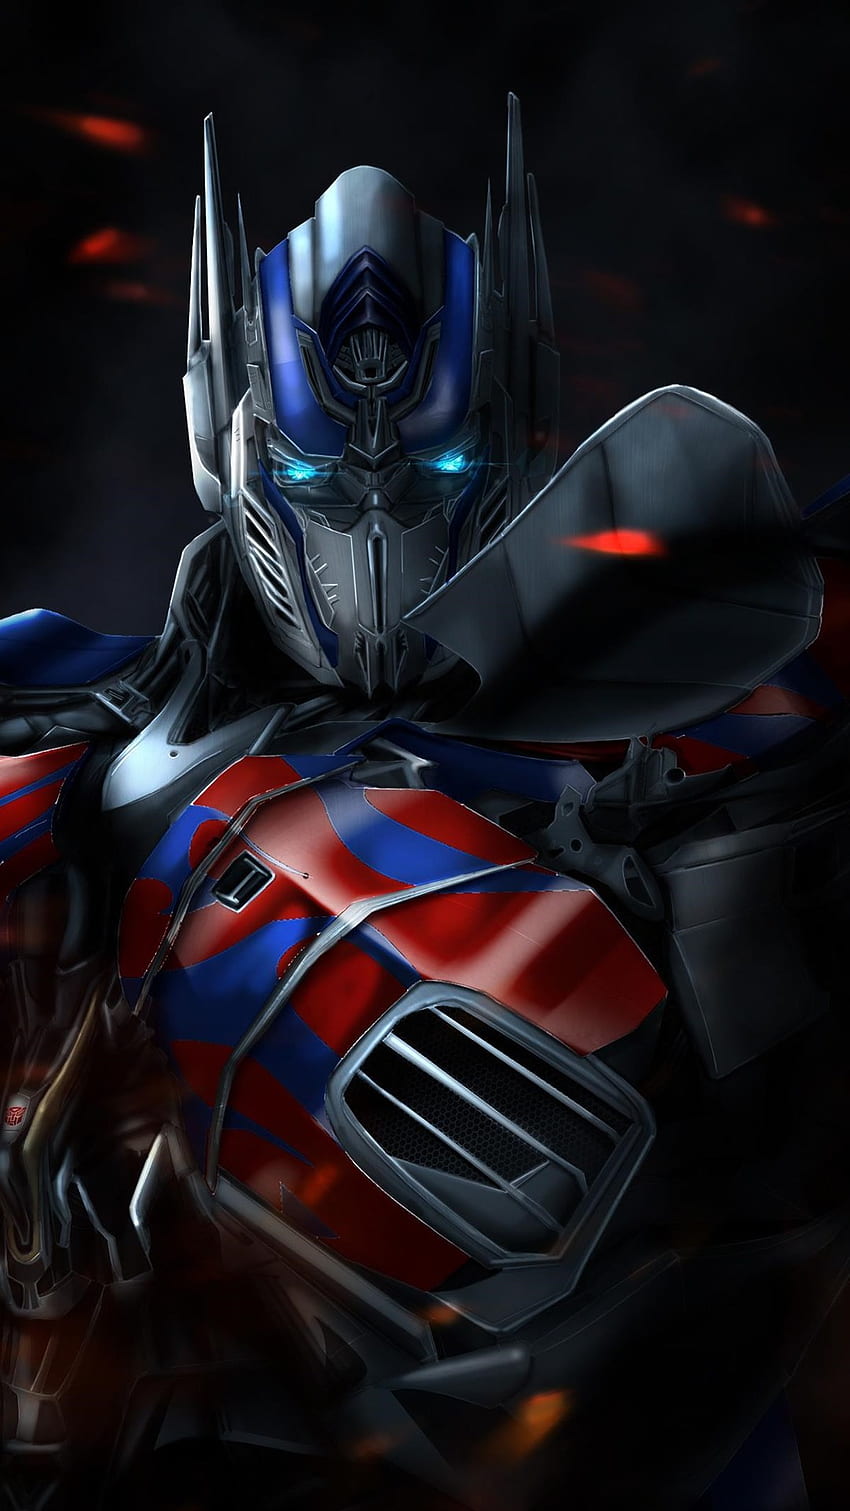 Free download Optimus Prime Wallpapers for Iphone 7 Iphone 7 plus  1080x1920 for your Desktop Mobile  Tablet  Explore 74 Optimus Prime  Wallpapers  Optimus Prime 2015 Wallpaper Transformers Optimus Prime  Wallpaper Optimus Prime Wallpaper Hd